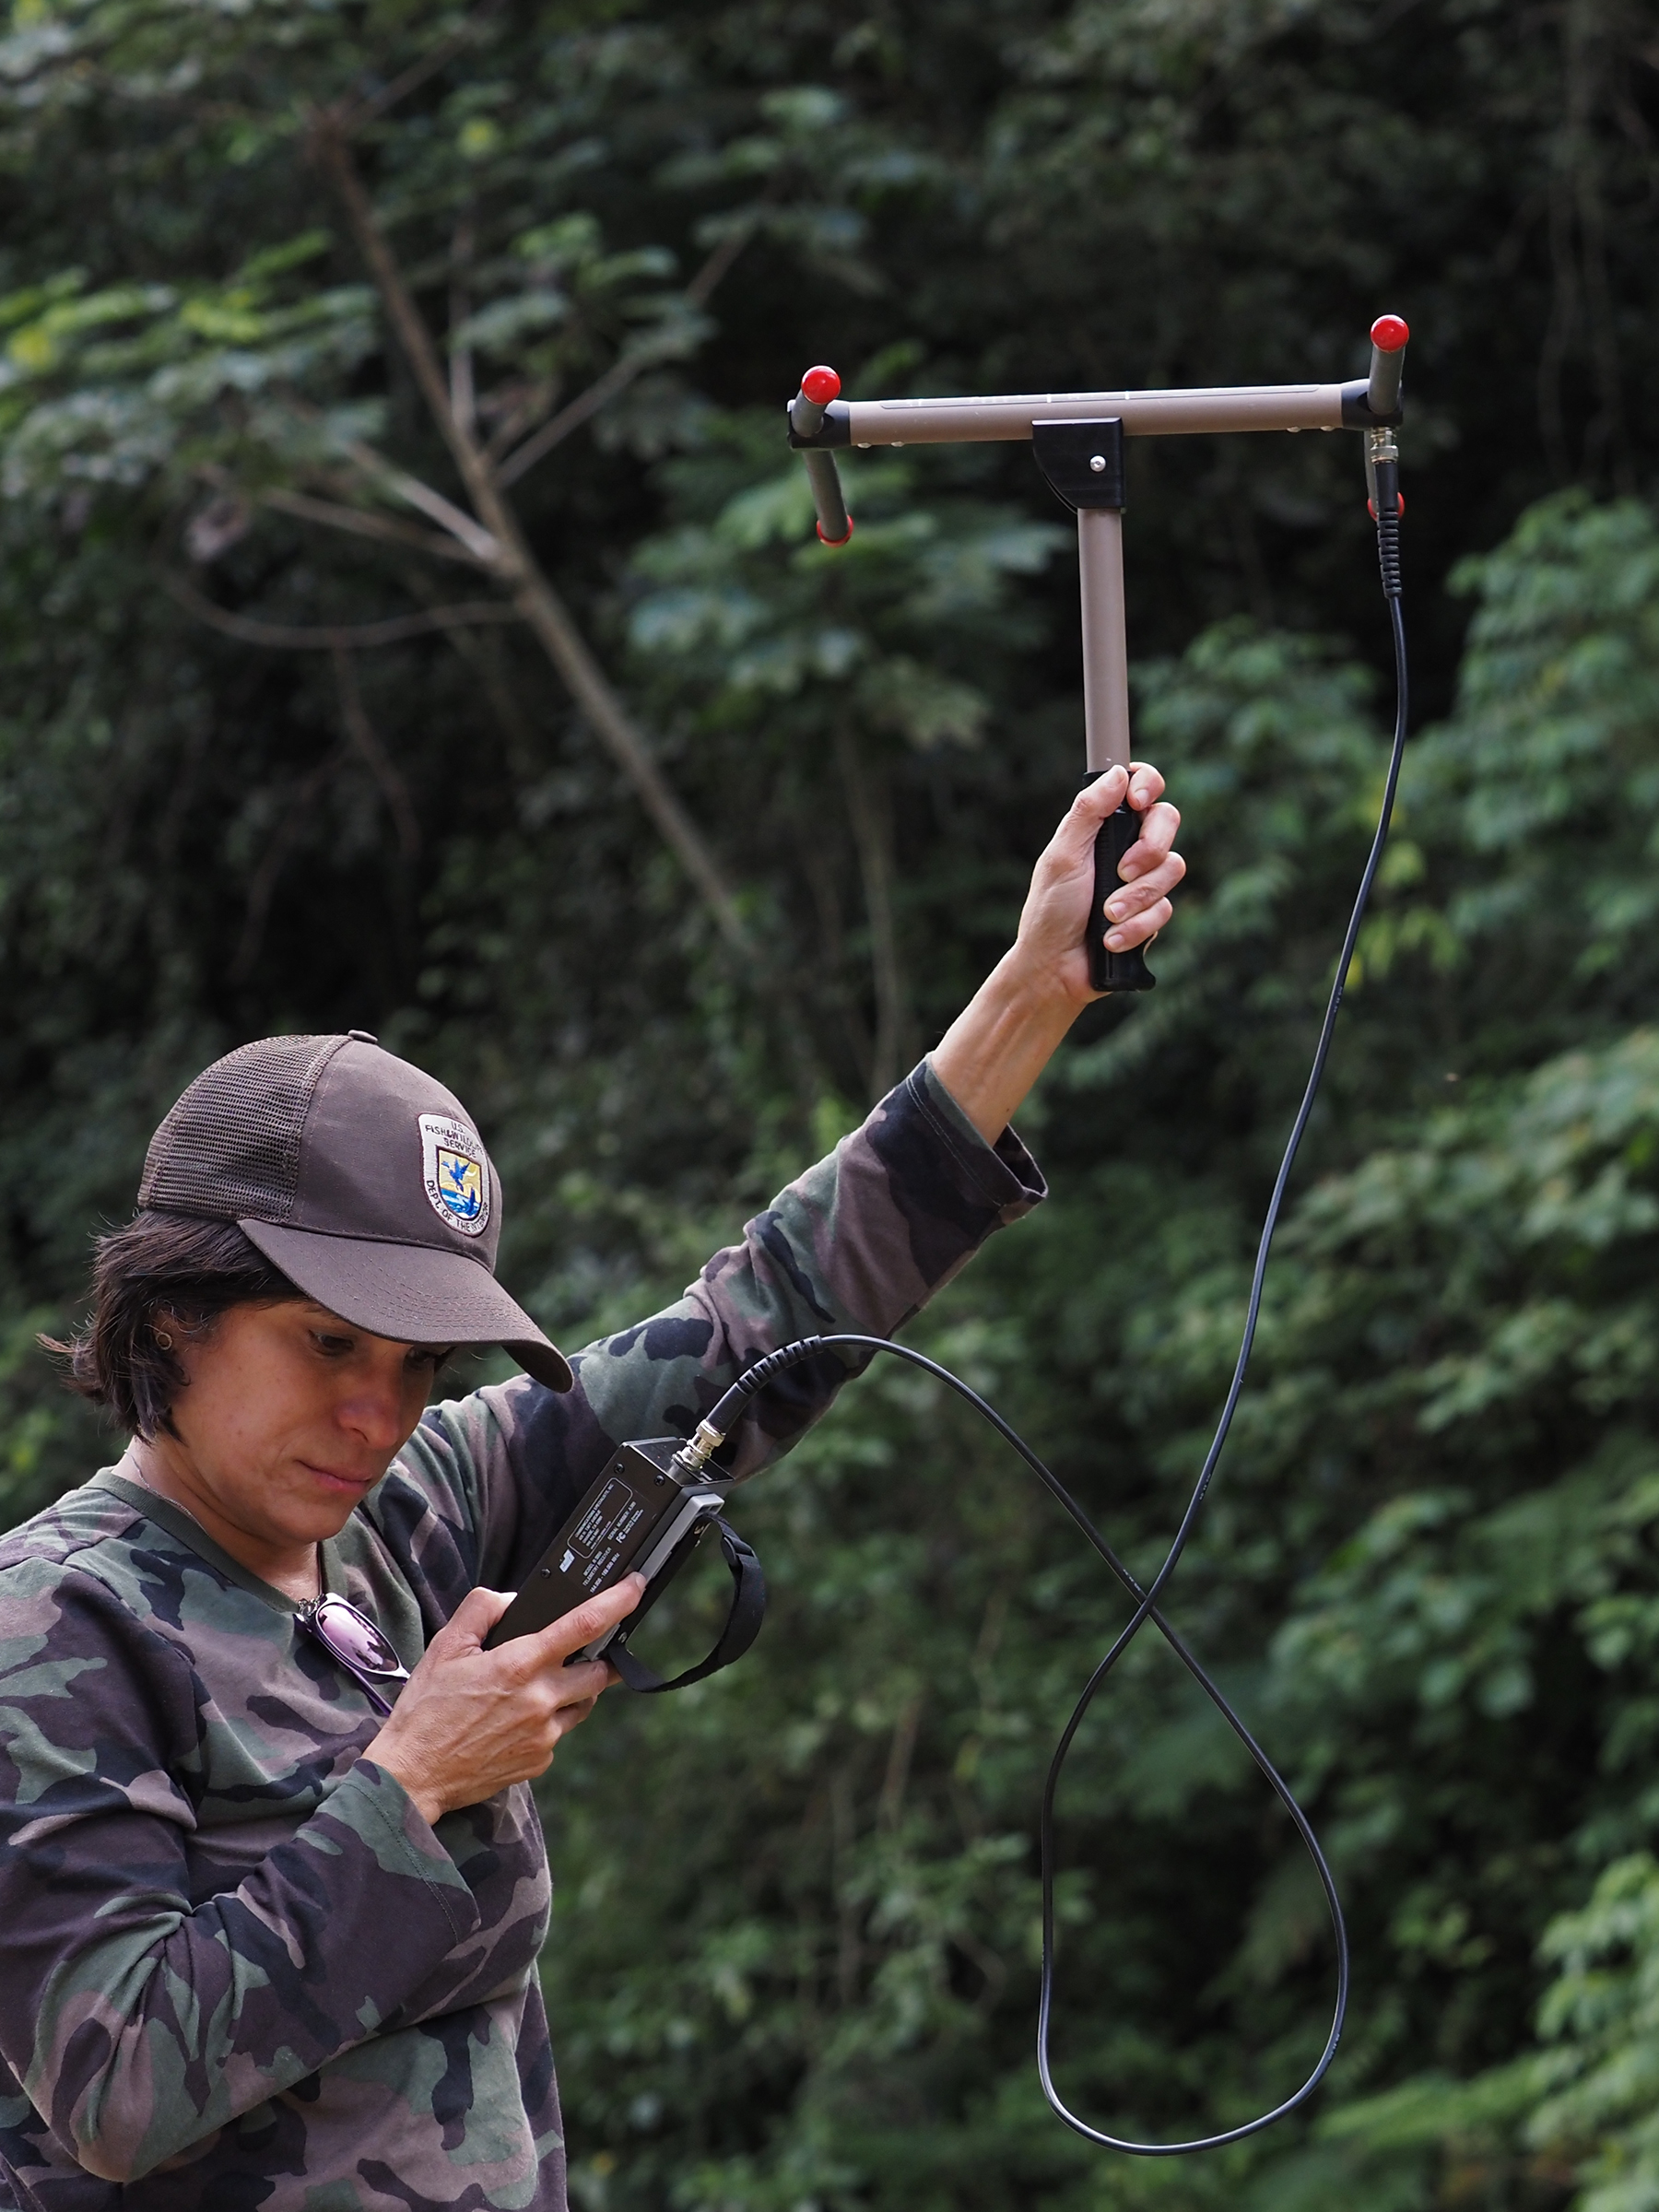 Woman in fish and wild life service uniform standing in a forest holding telemetry equipment to 